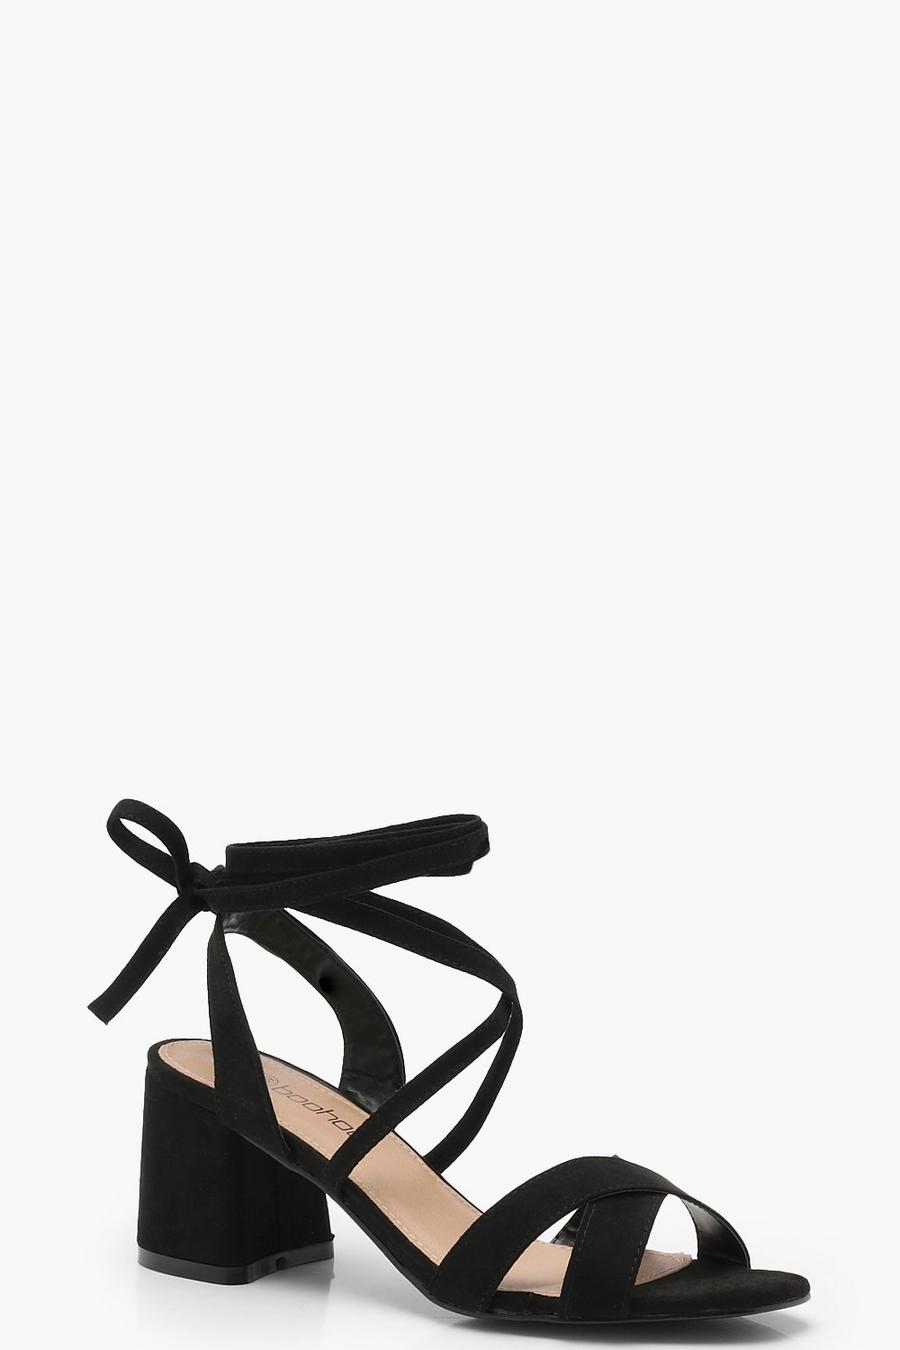 Black Extra Wide Fit Cross Strap Ankle Wrap Heels image number 1